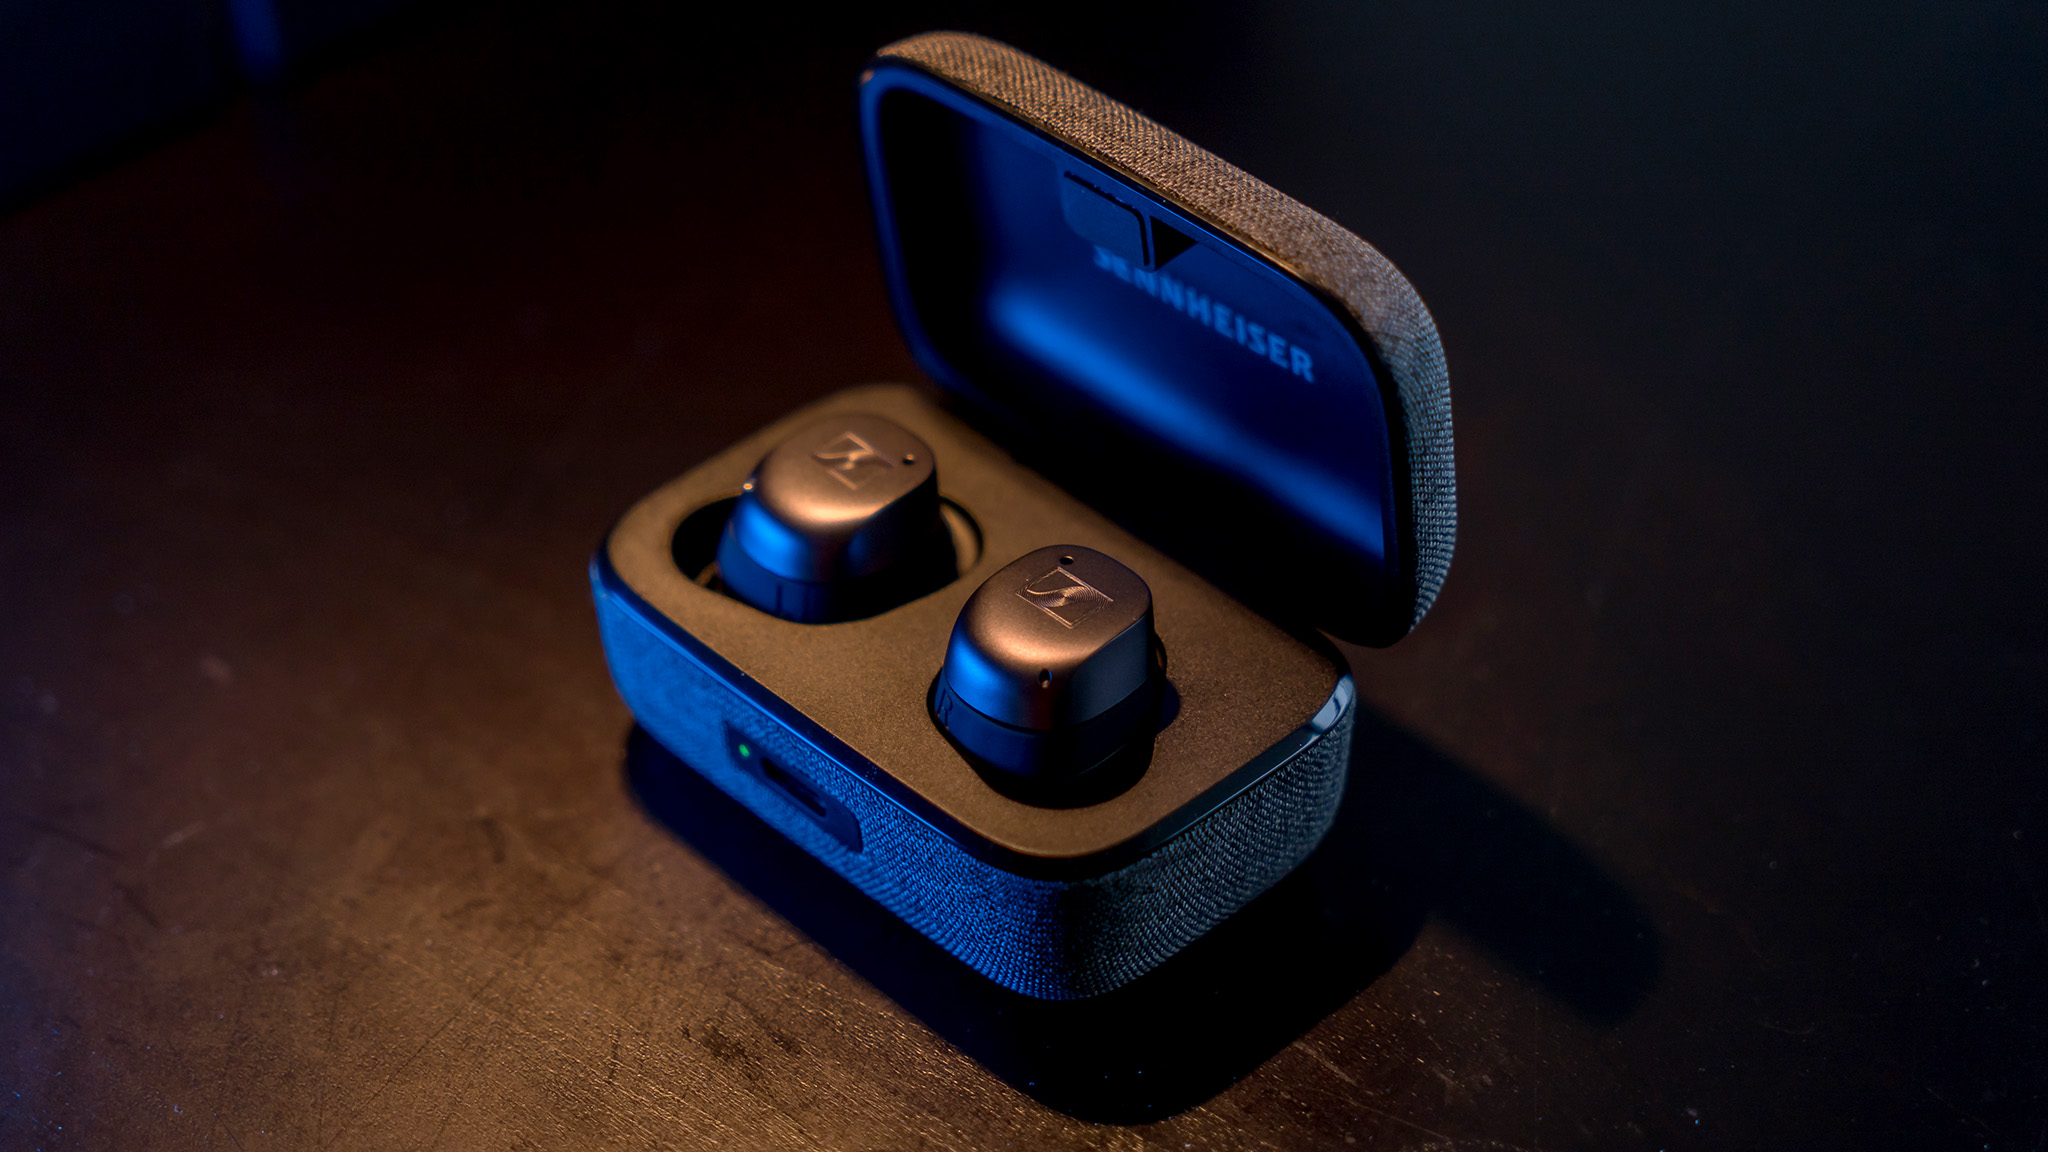 Angled view of Sennheiser Momentum True Wireless 3 earbuds in case.